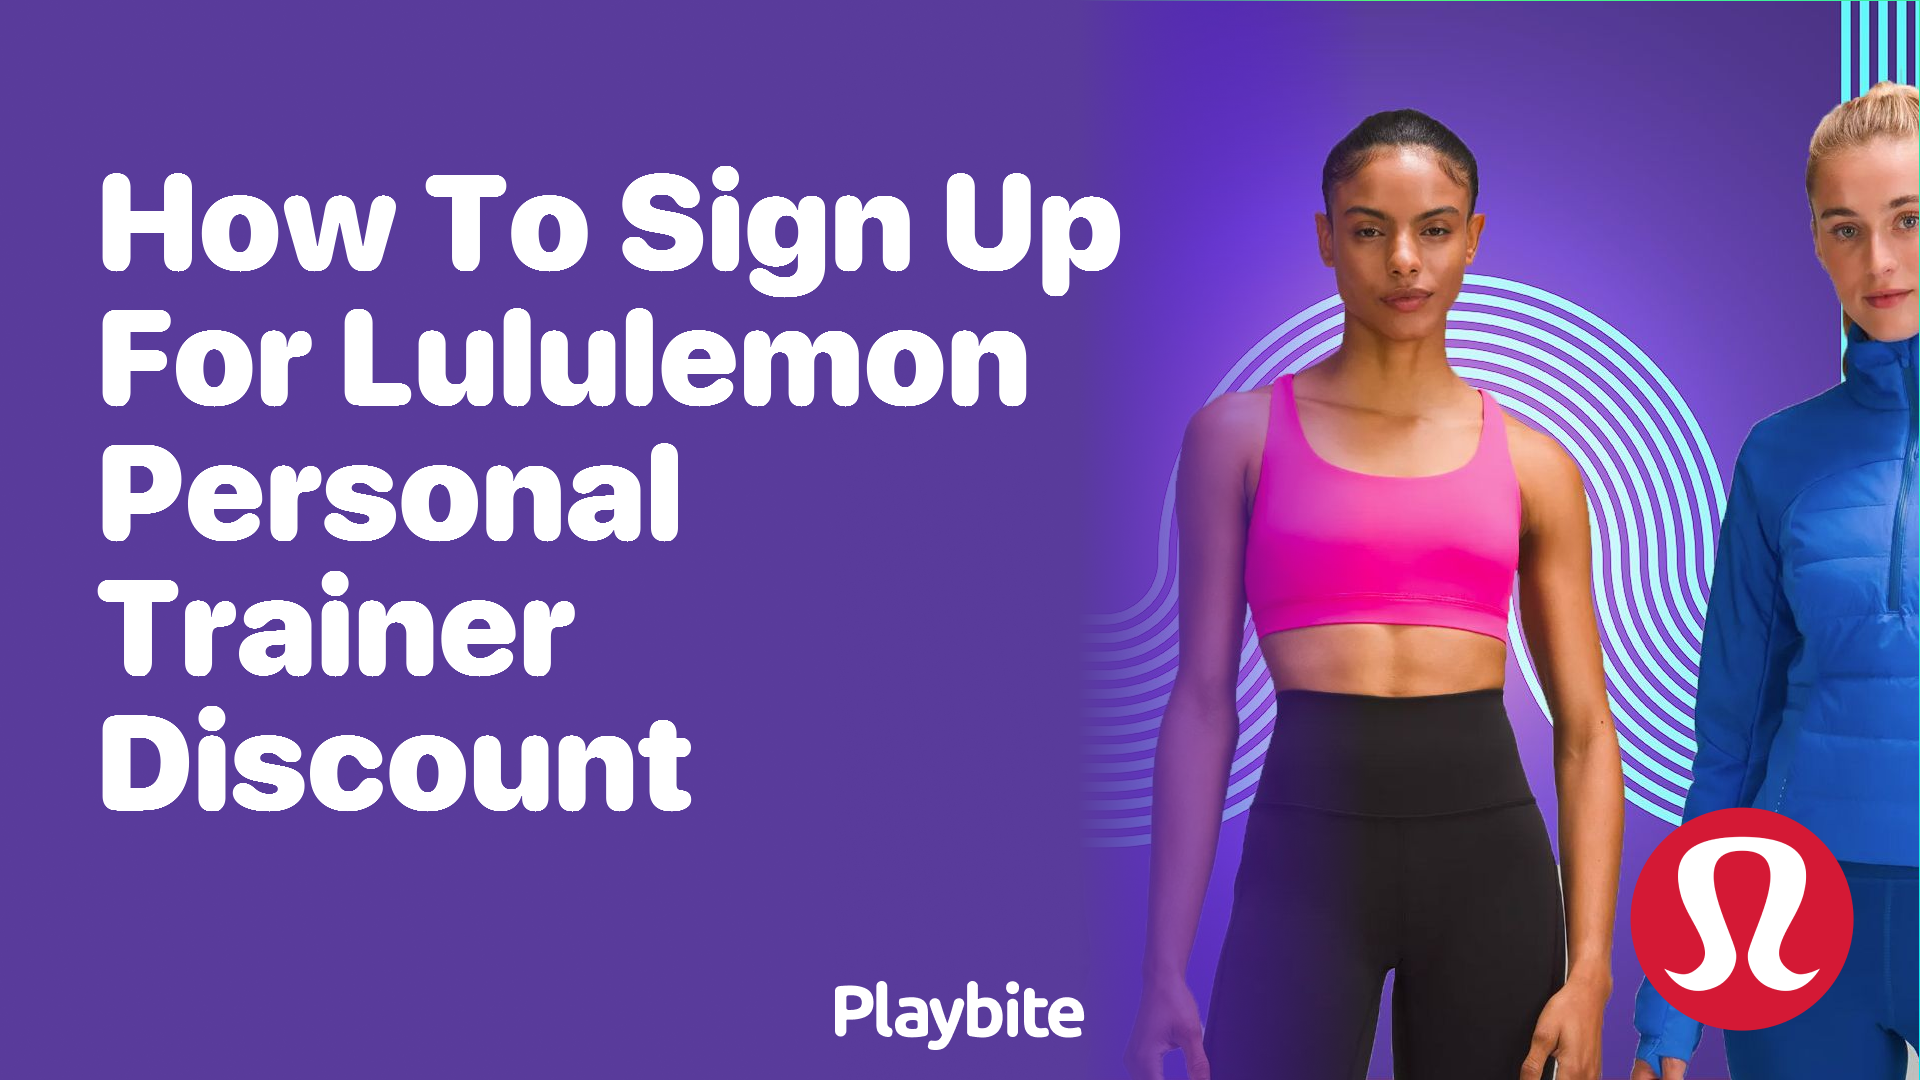 How to Sign Up for Lululemon Personal Trainer Discount